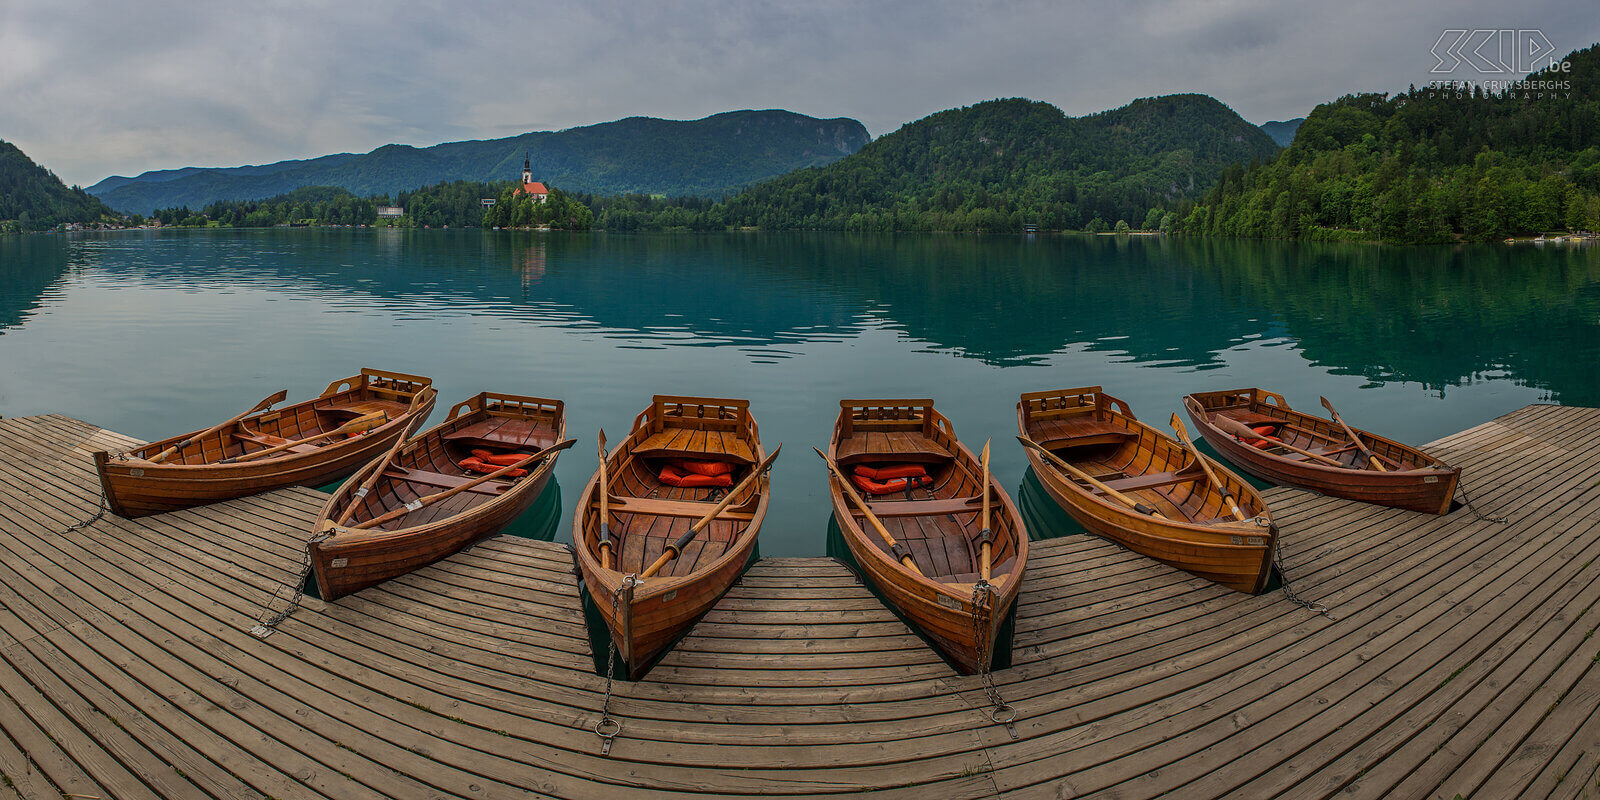 Bled - Rowing boats The beautiful Lake Bled is one of the most popular and most important tourist attractions in Slovenia. It is located in northwestern Slovenia in the Julian Alps just outside the Triglav National Park. Stefan Cruysberghs